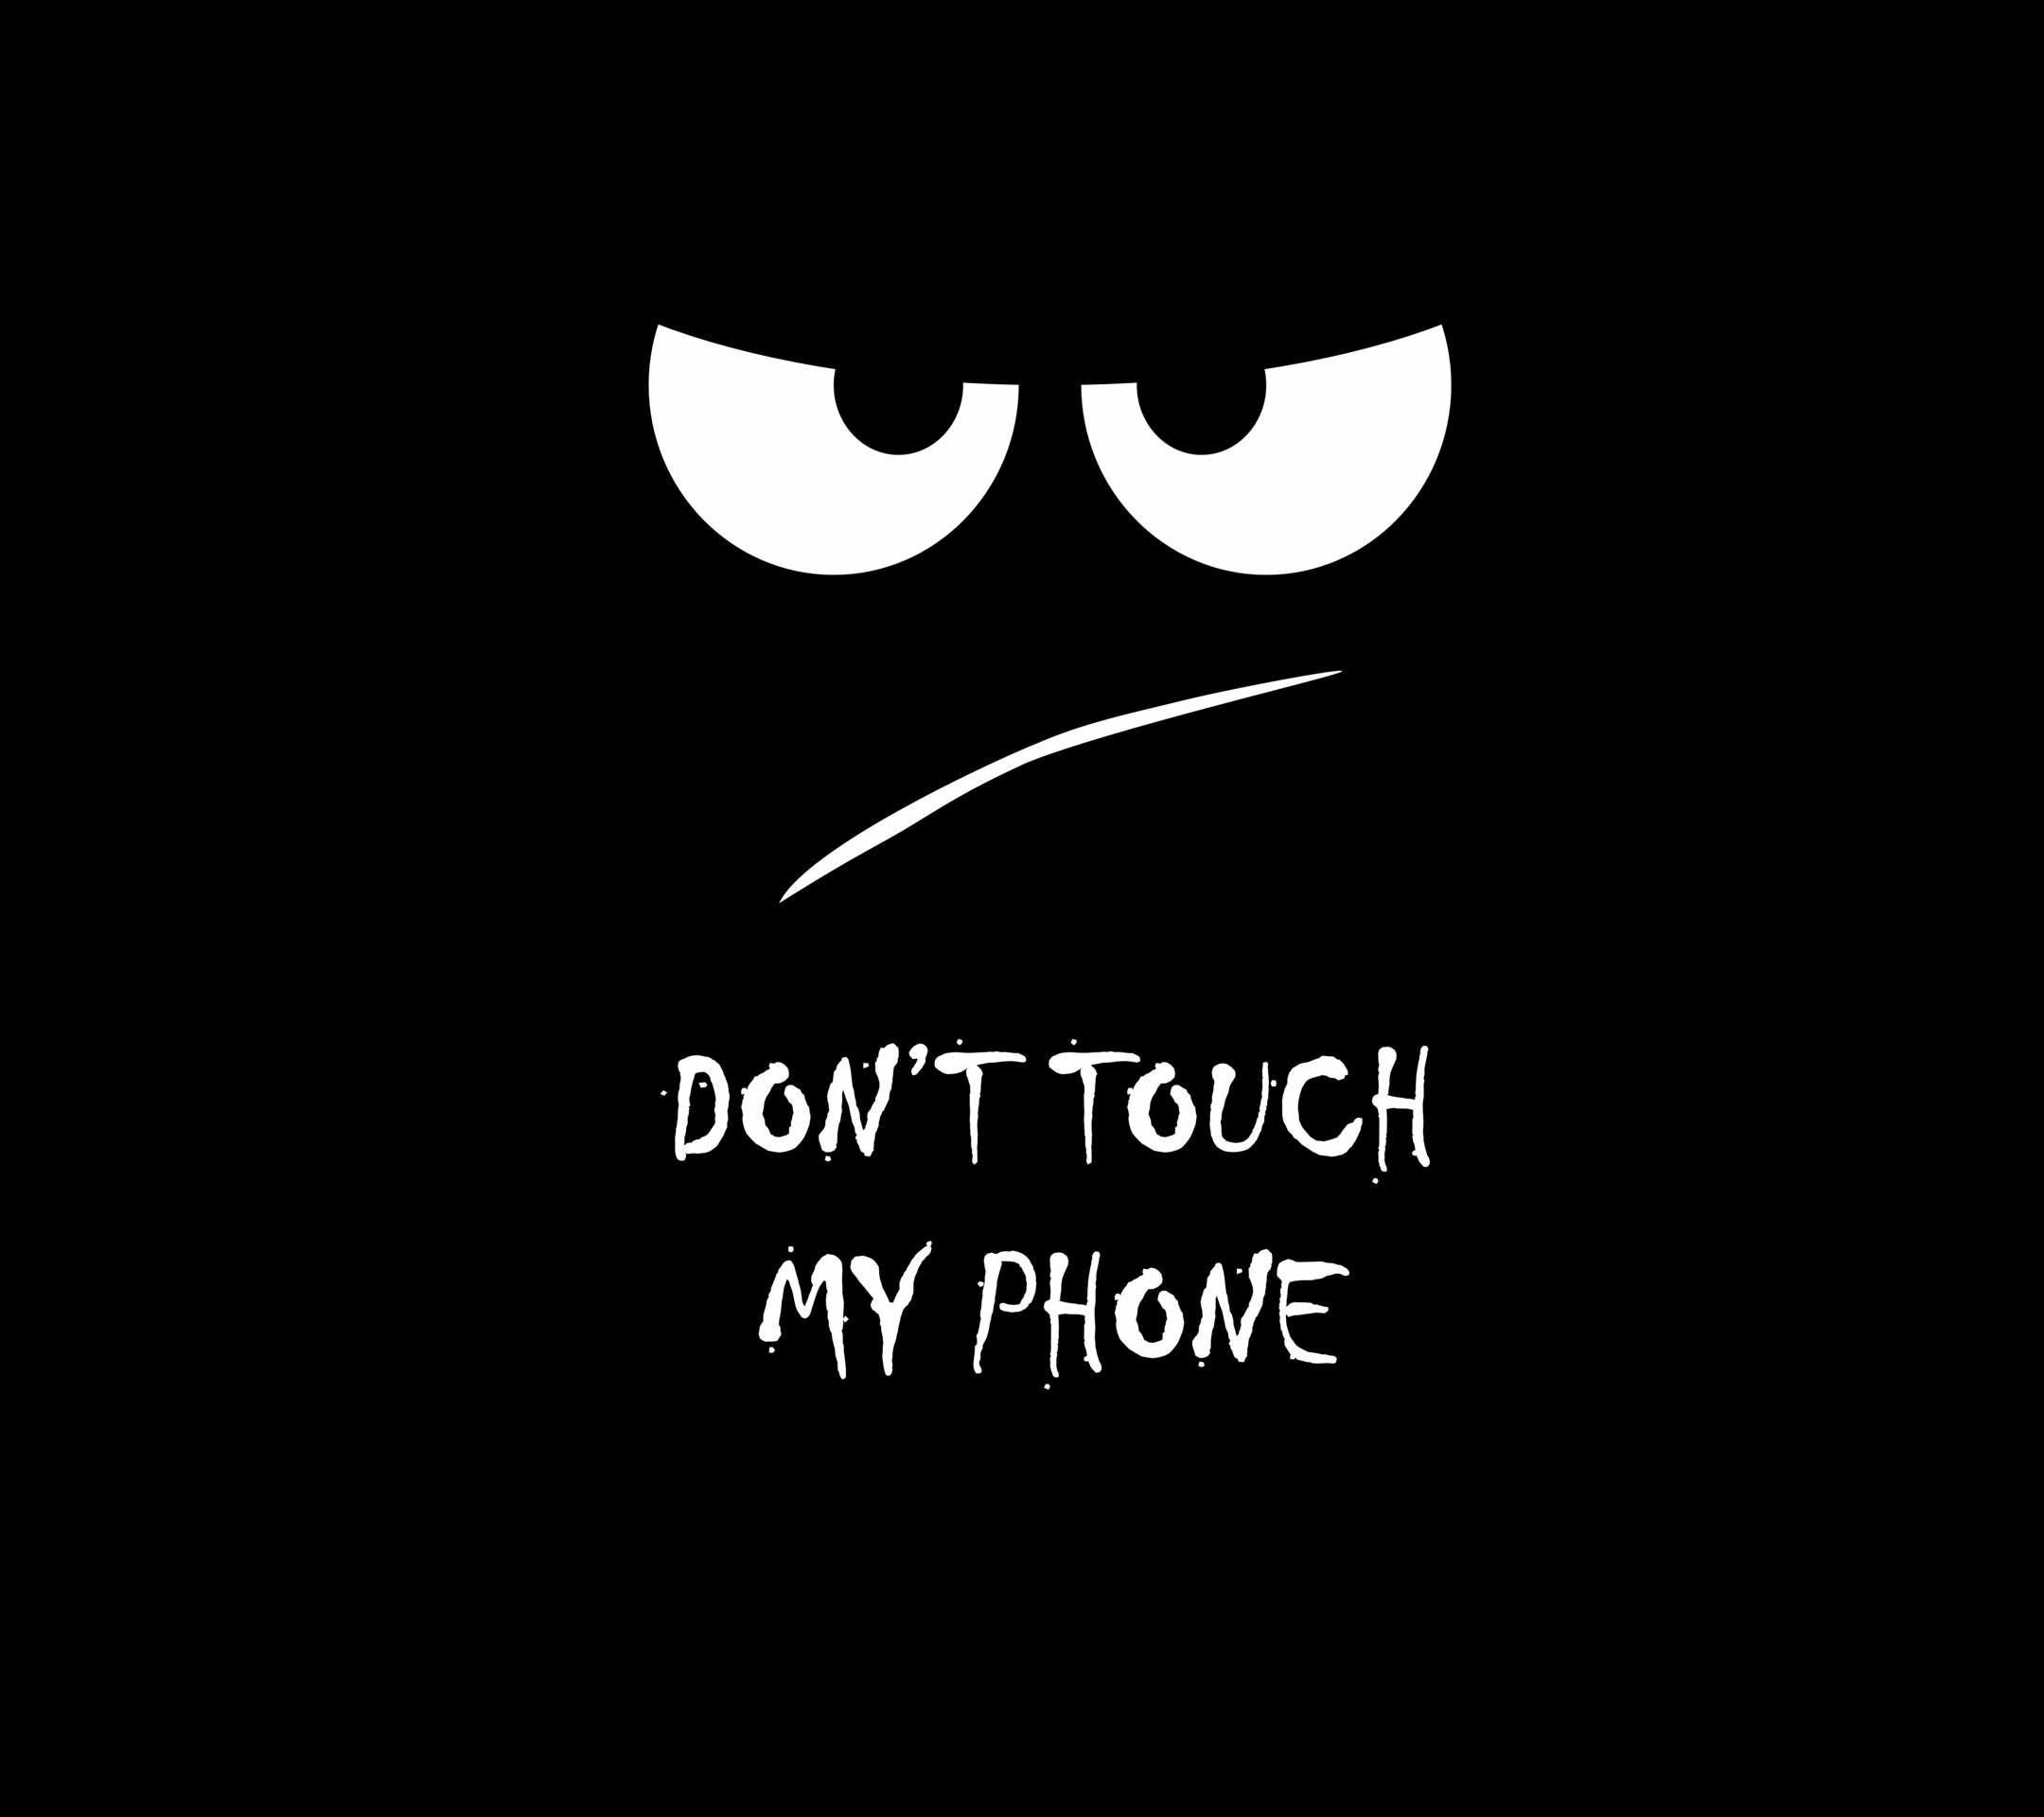 Don't Touch My Phone Hd Black Wallpapers - Wallpaper Cave.